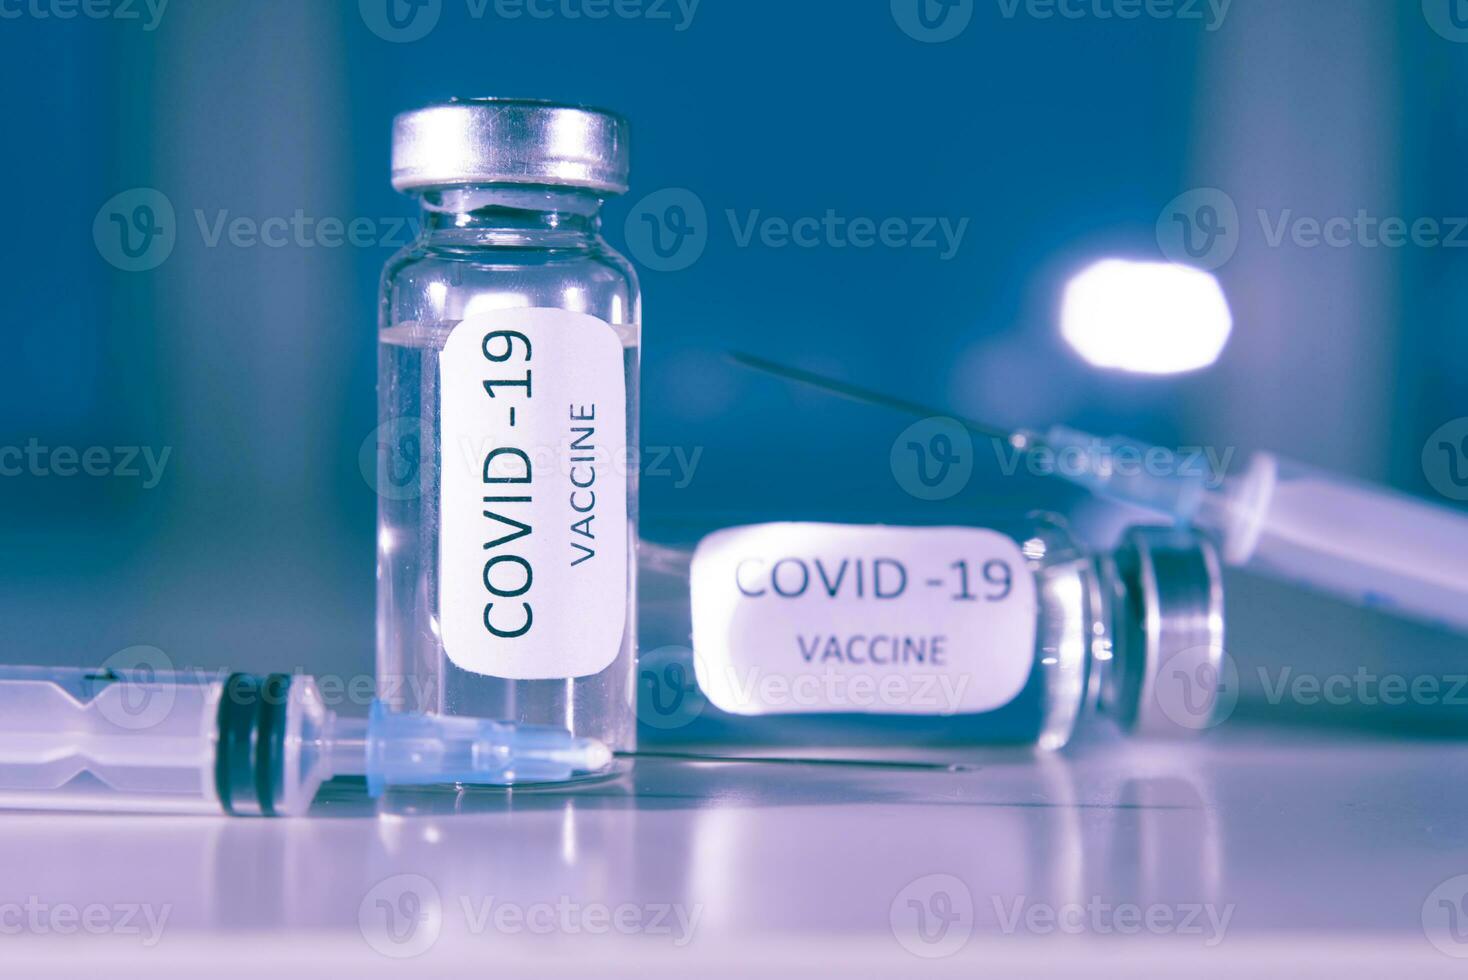 Vaccination against coronavirus COVID-19. Ampoule and syringe close-up. Concept photo